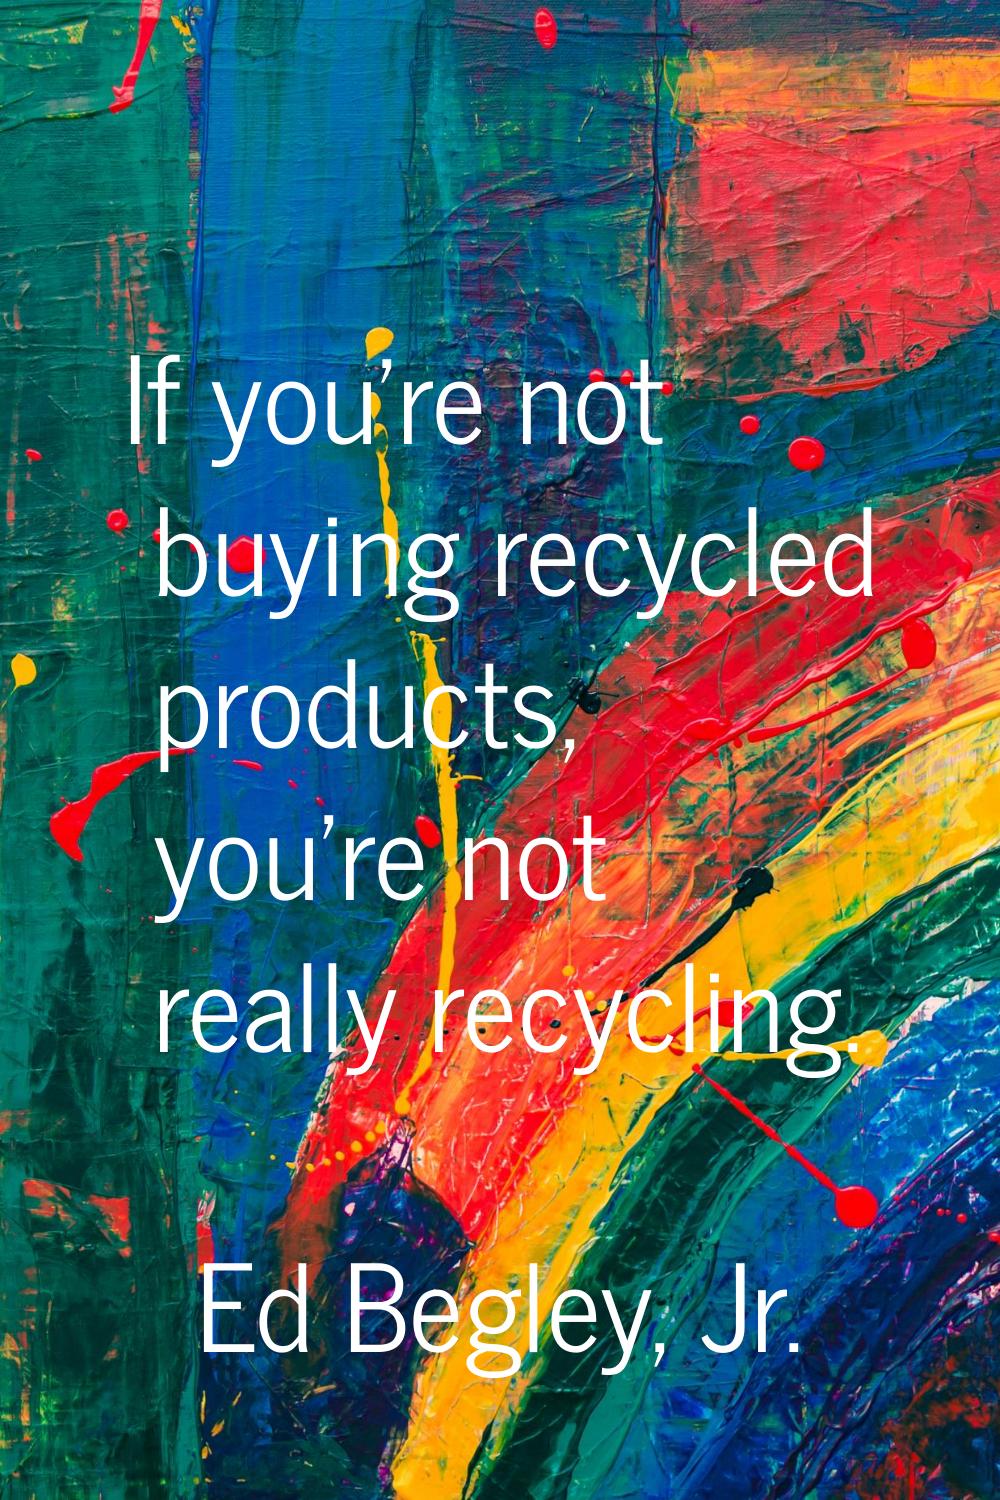 If you're not buying recycled products, you're not really recycling.